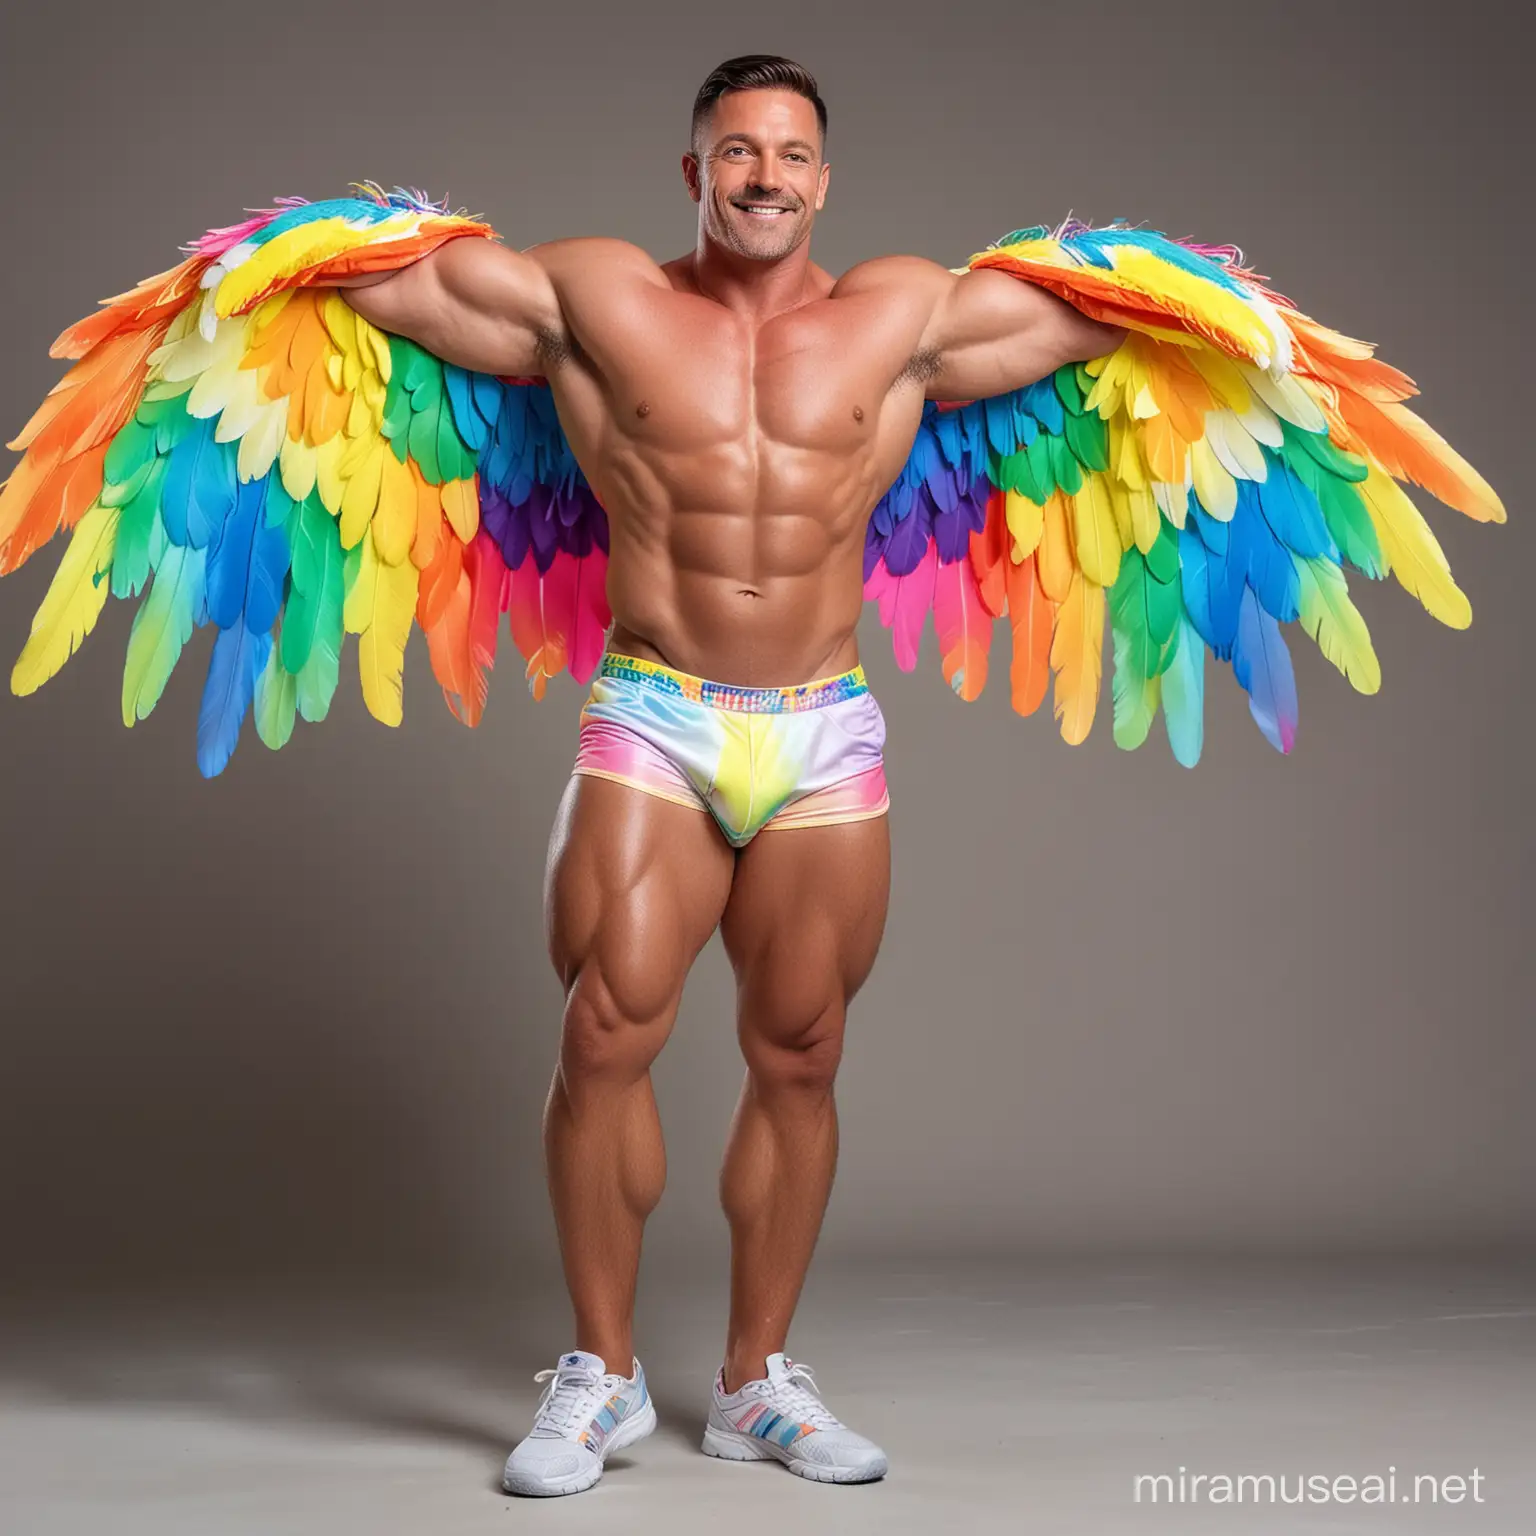 Full Body to feet Happy Topless 30s Ultra Chunky IFBB Bodybuilder Daddy wearing Multi-Highlighter Bright Rainbow Coloured with white See Through Eagle Wings Shoulder Jacket Short shorts Flexing his Big Strong Arm